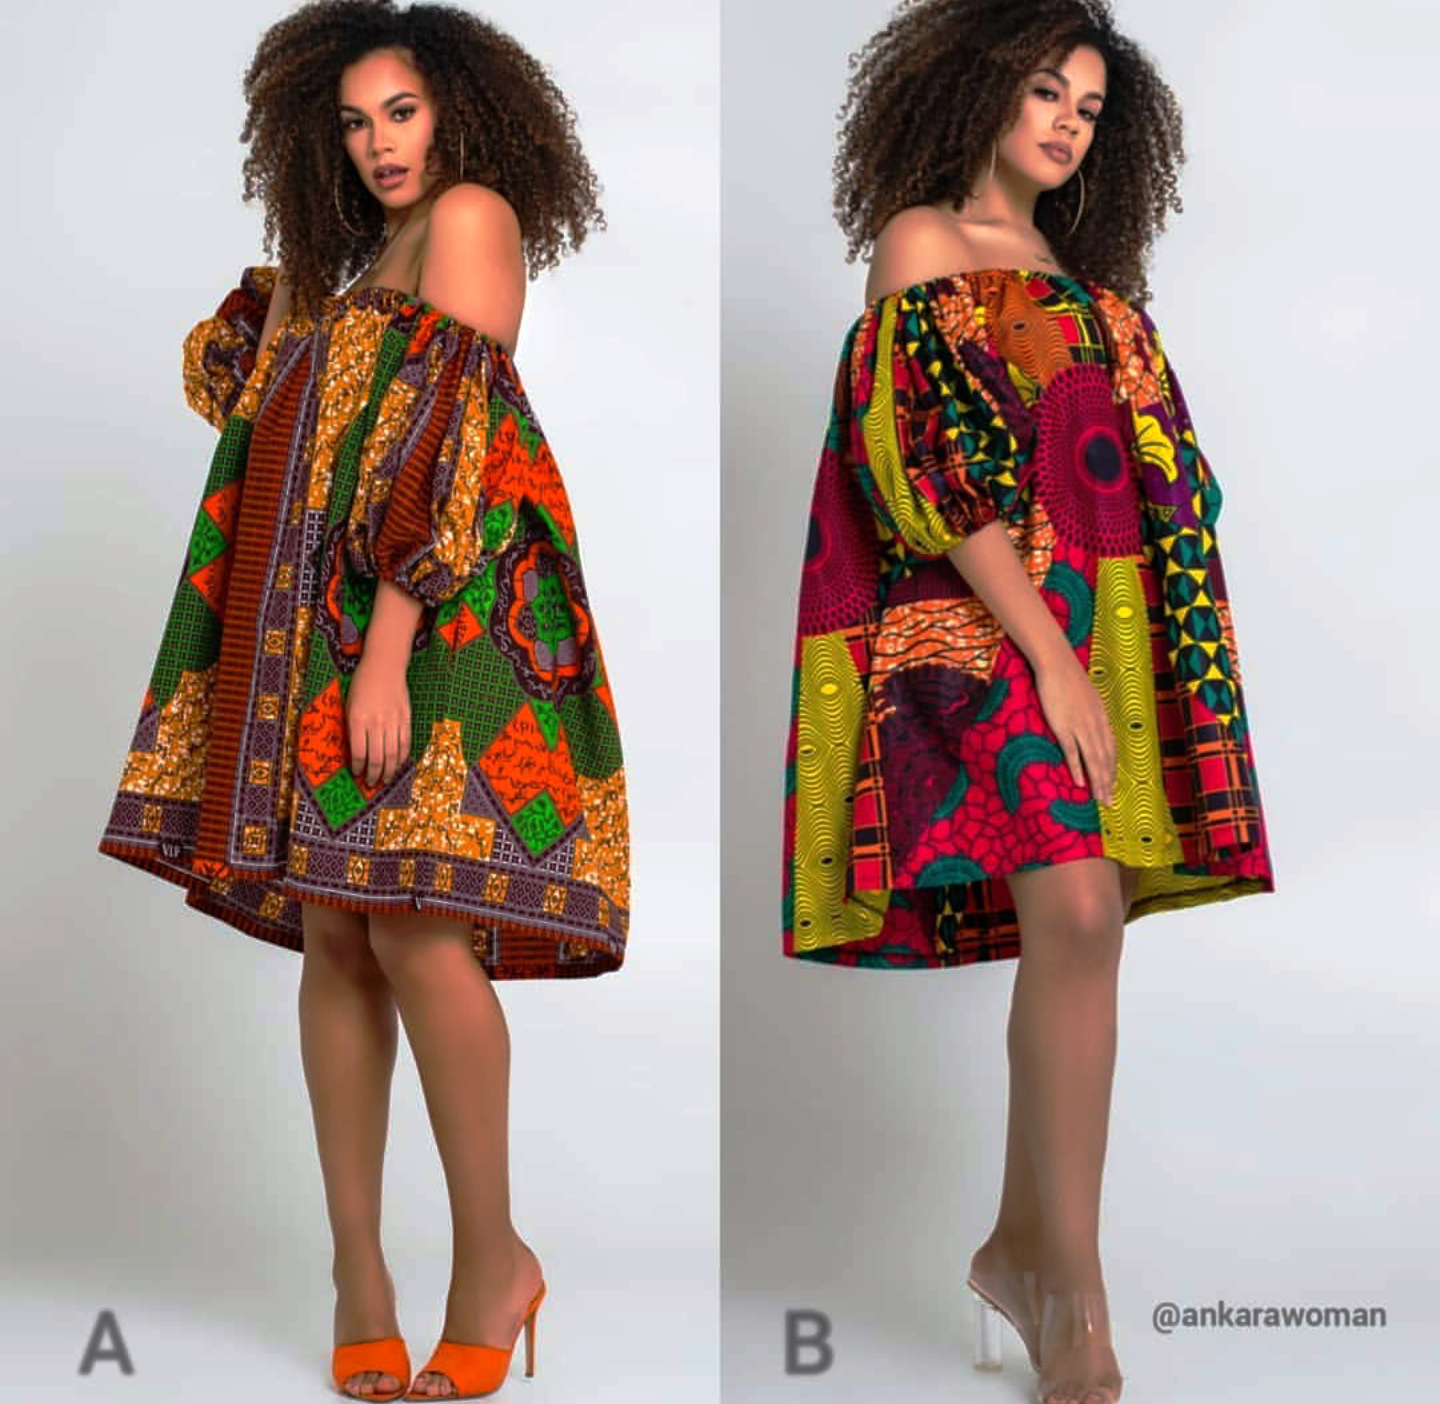 2019 AFRICAN PRINT DESIGN DRESSES : HOT AND PRETTY ANKARA STYLES WITH ...